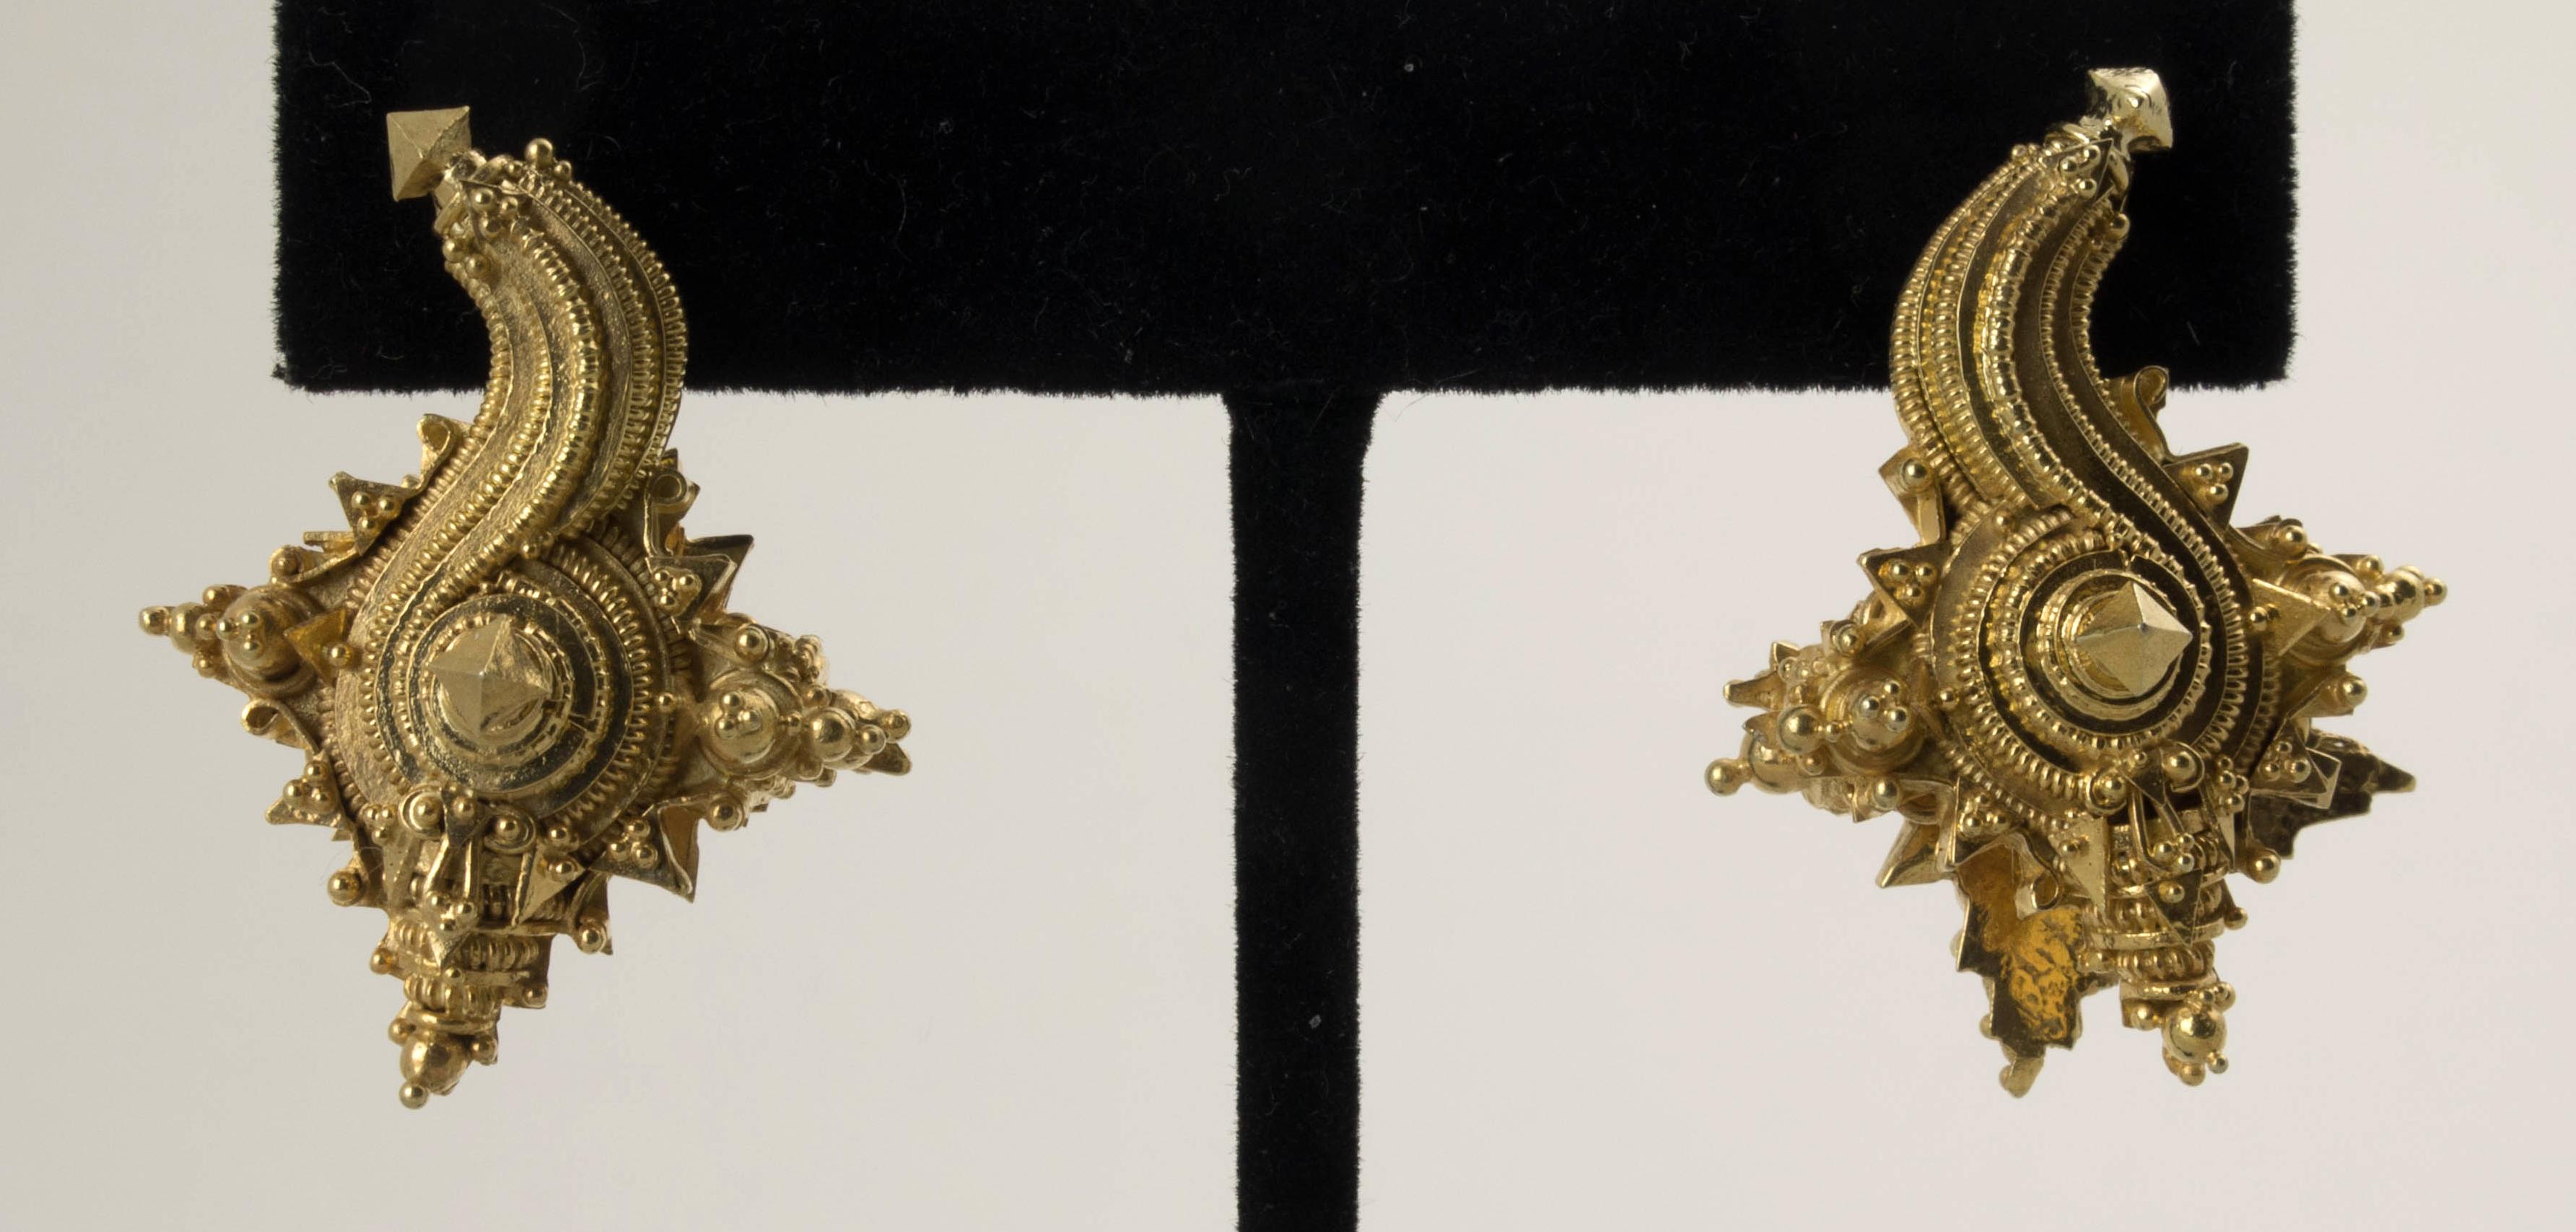 Antique Javanese 22k Gold Conch Shaped Earrings, 10th-15th Century, Indonesia For Sale 1